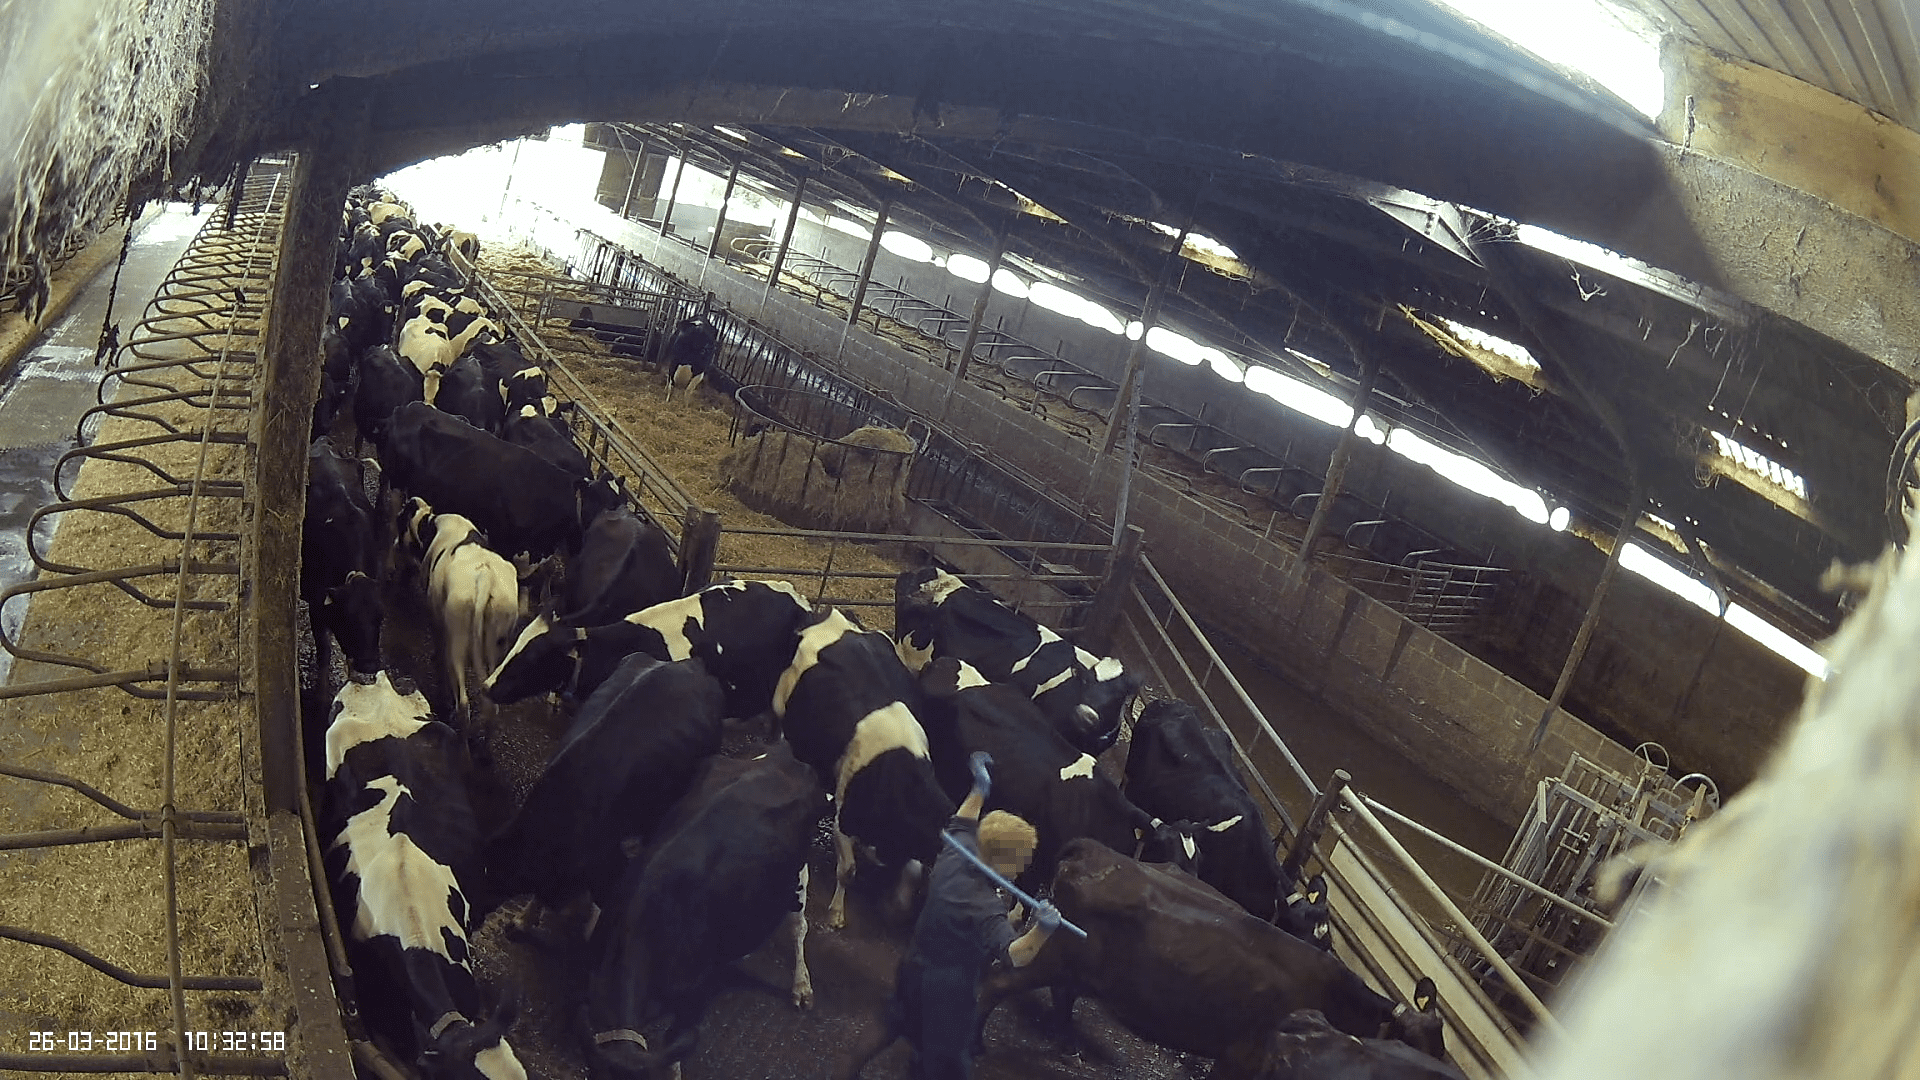 Watch: Undercover footage shows cows being kicked and struck with a pipe at award-winning dairy farm